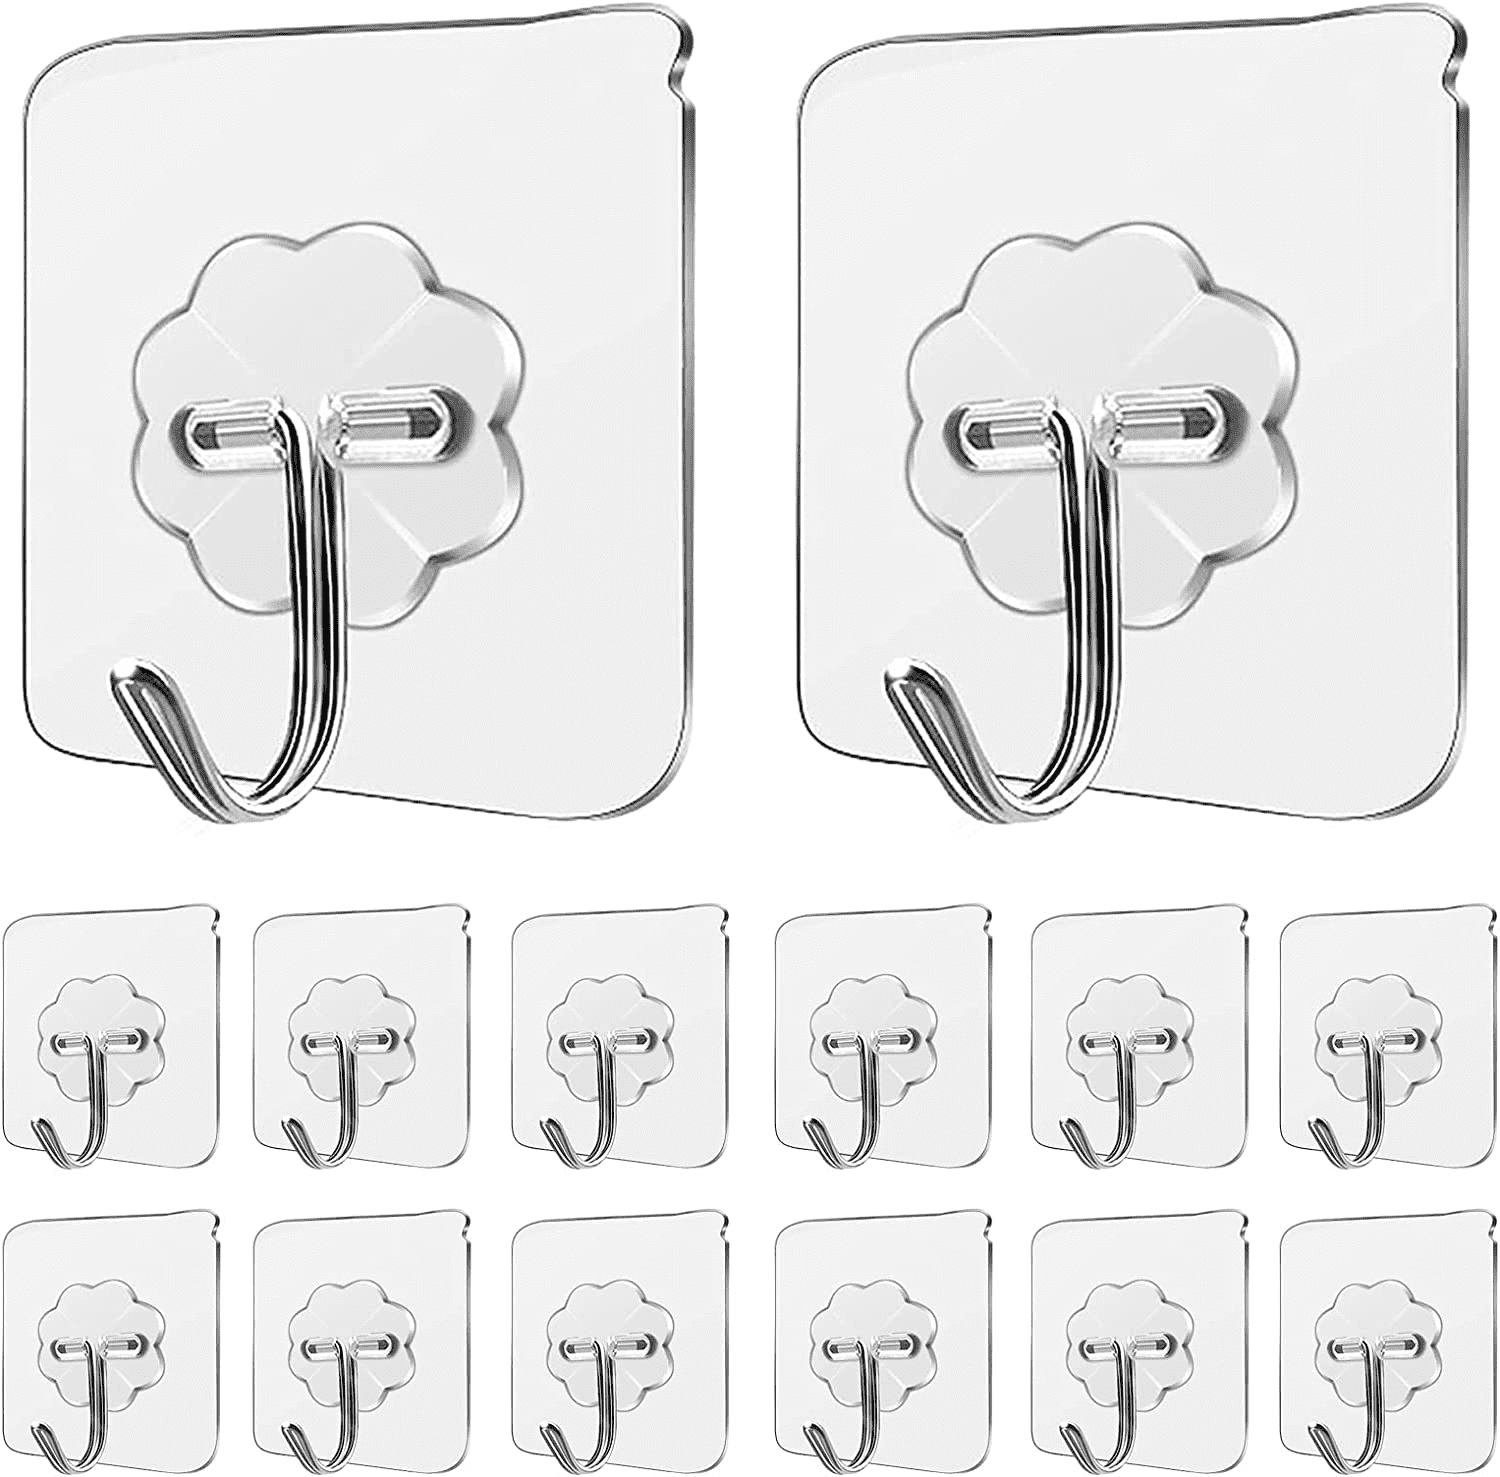 Waterproof Self Adhesive Removable Hanging Hooks With Strong